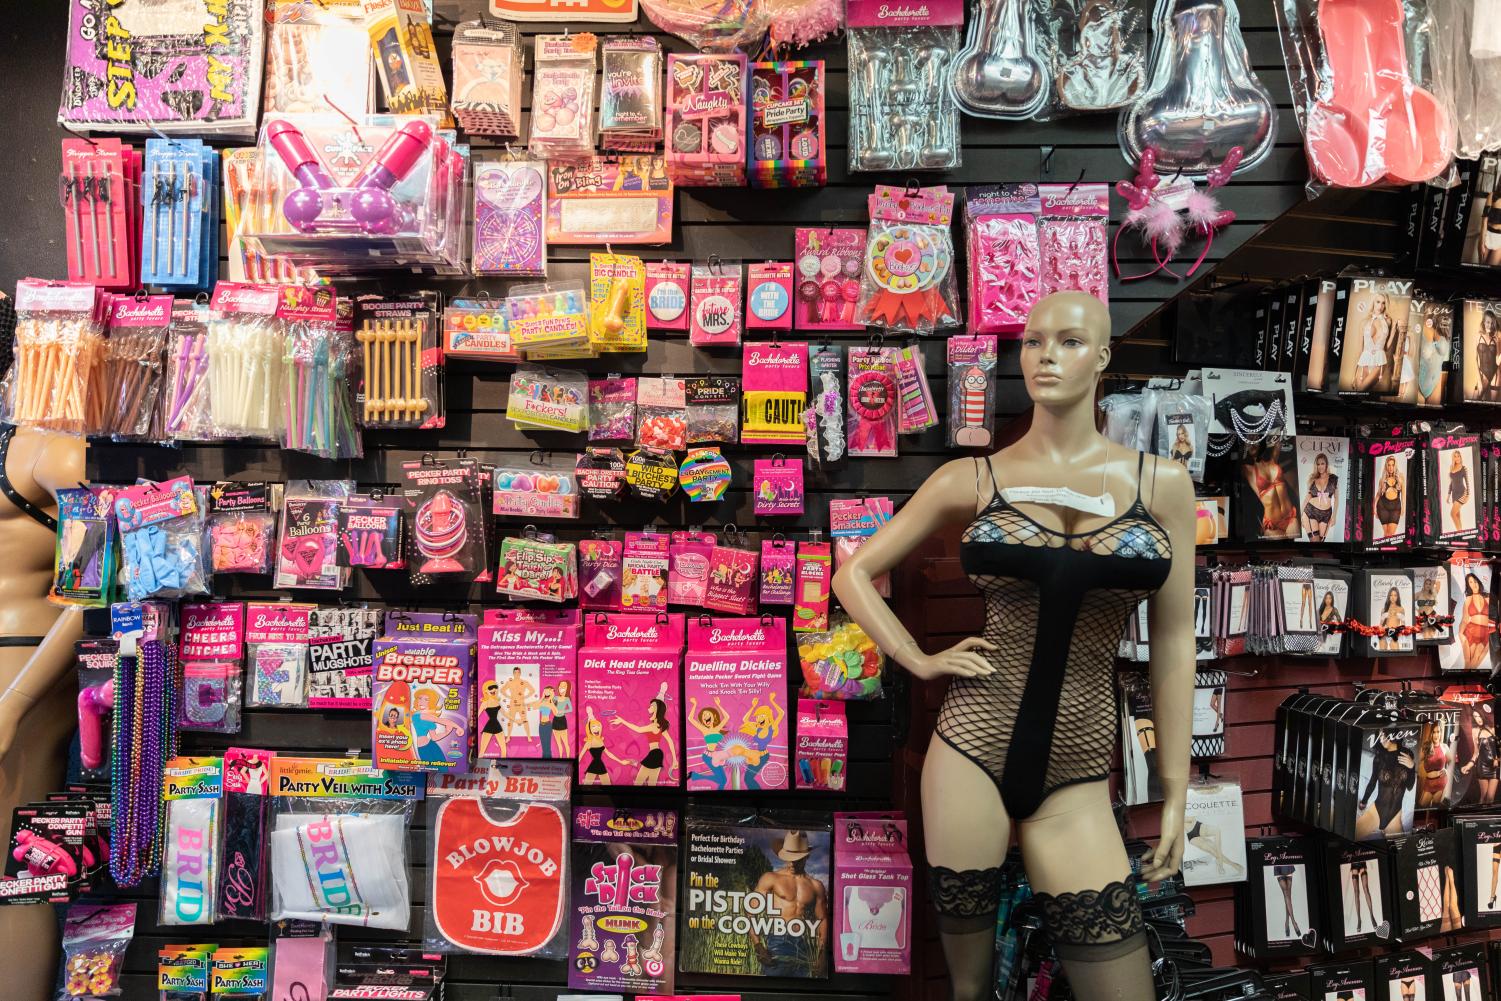 Sex toy inclusivity Chicago sex toy stores provide resources for LGBTQ+ community